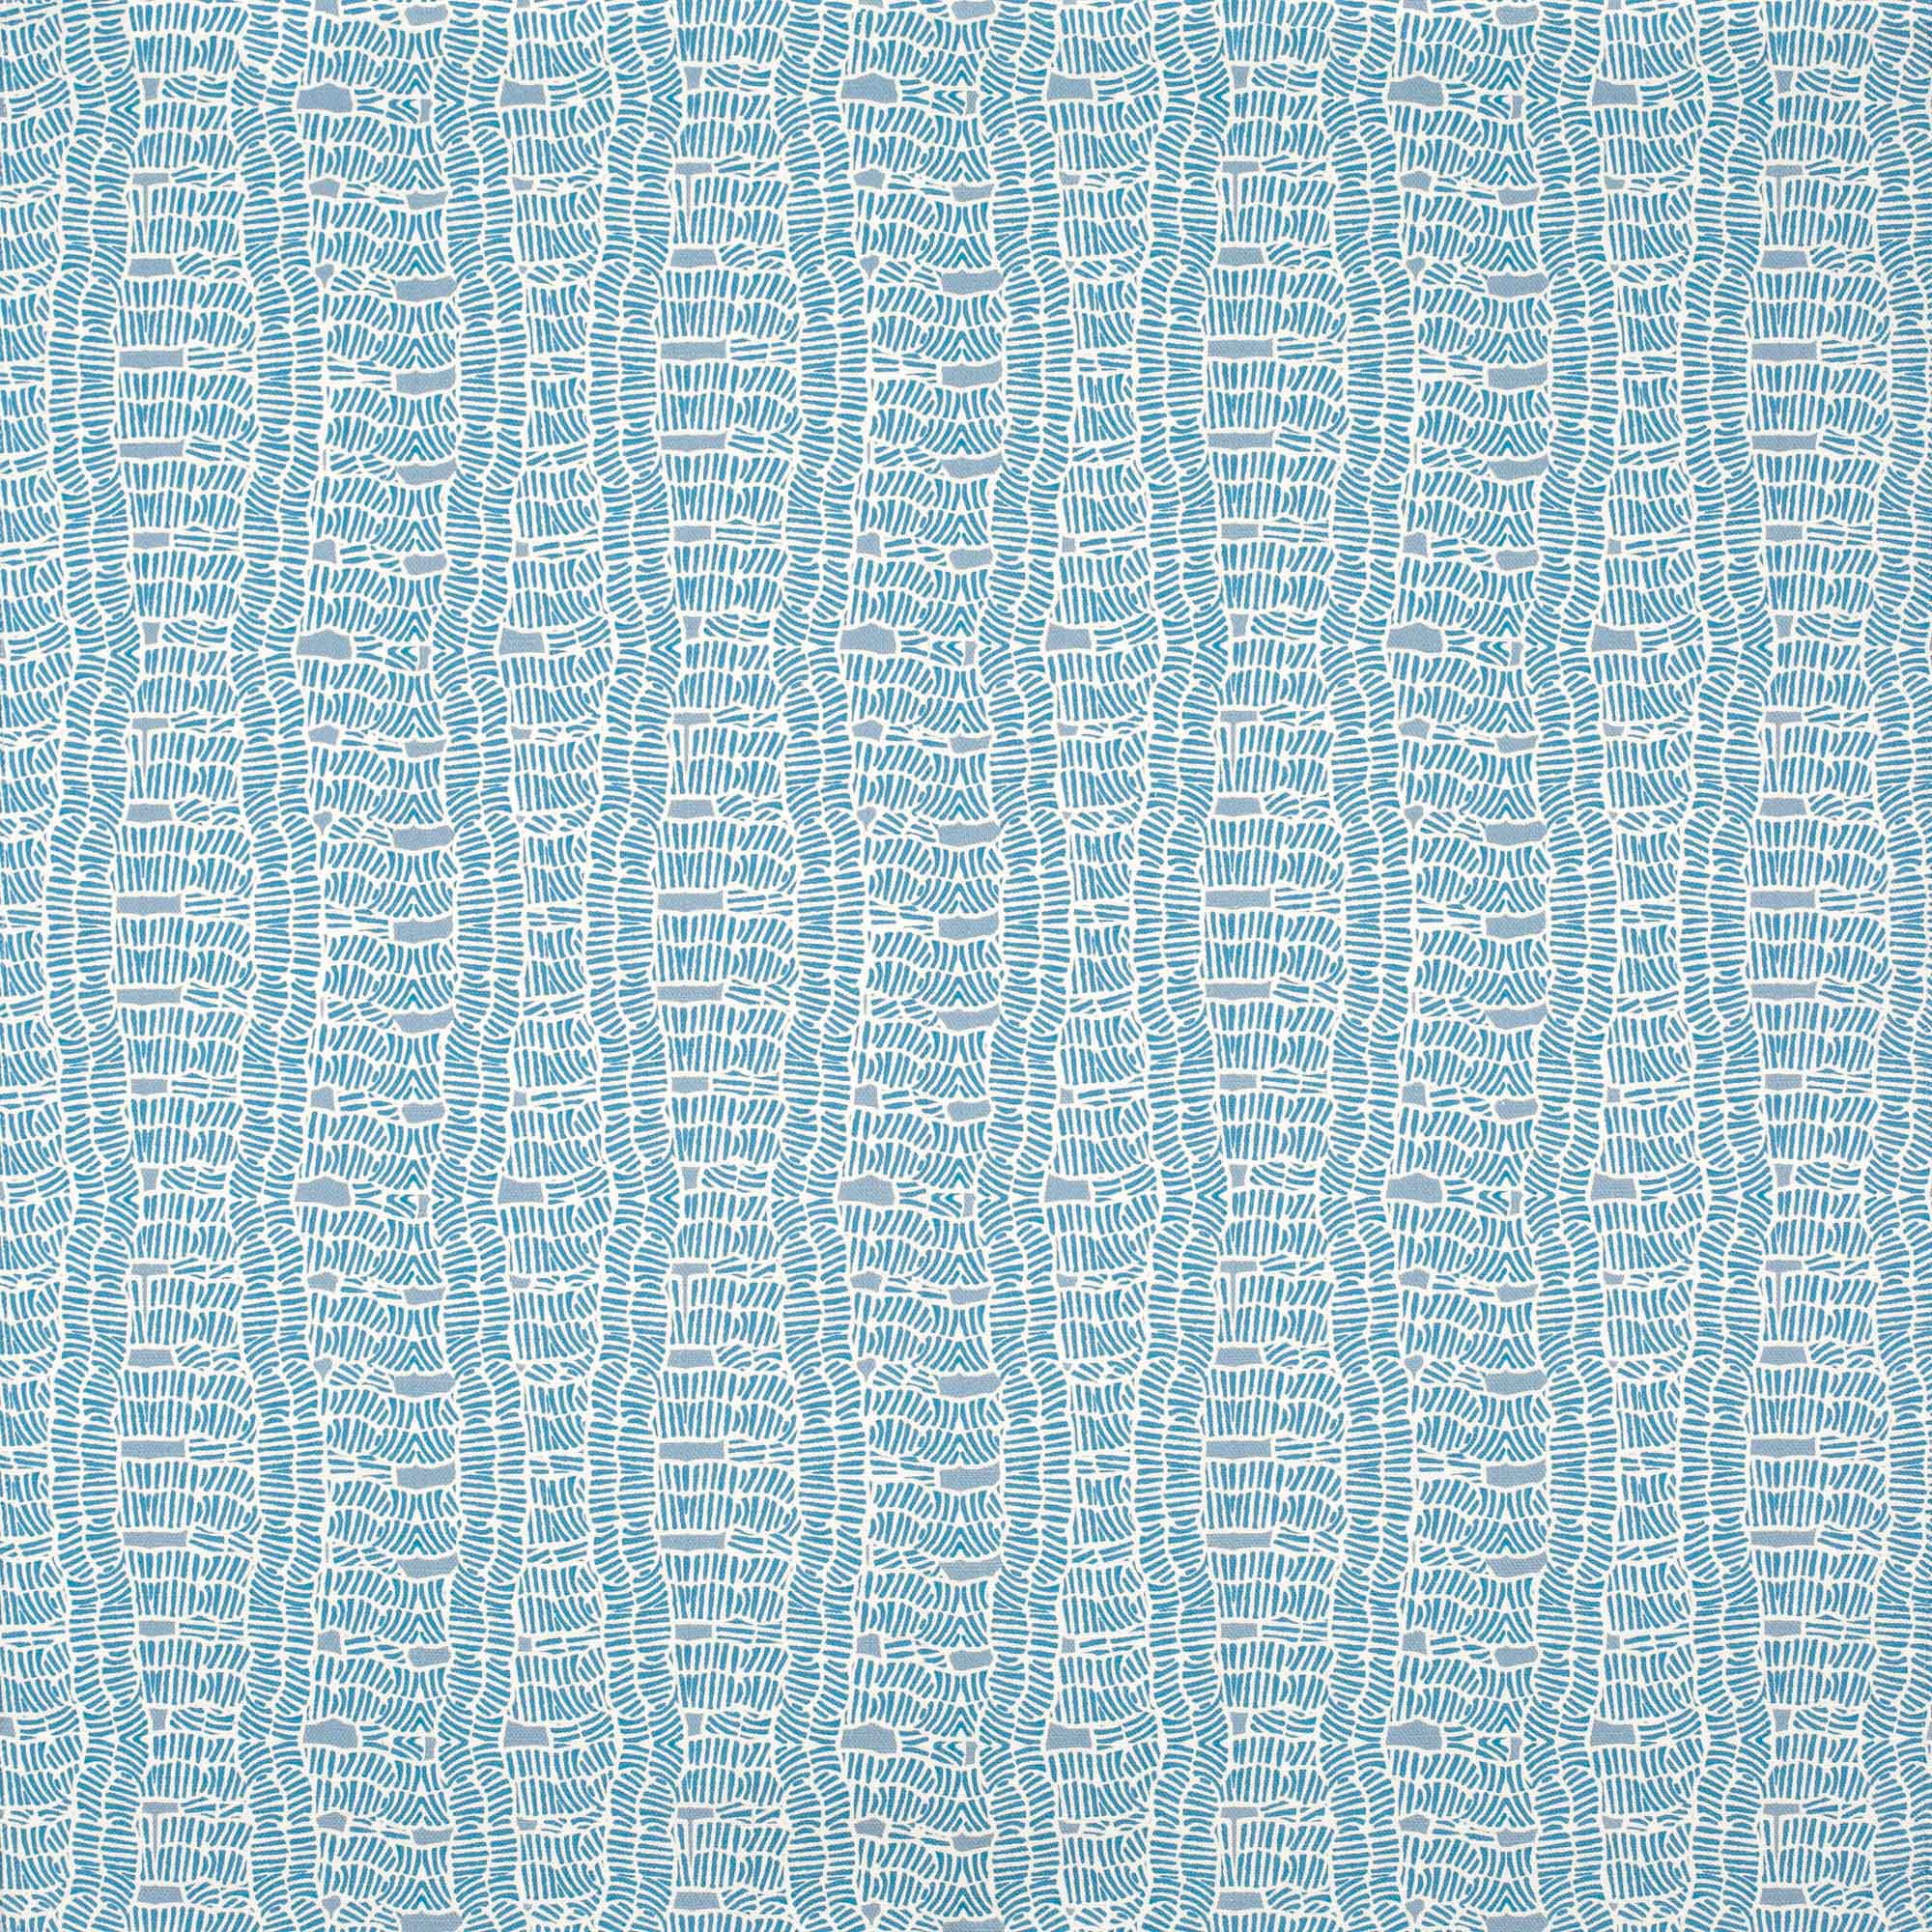 Detail of fabric in a playful curvy grid print in blue on a white field.